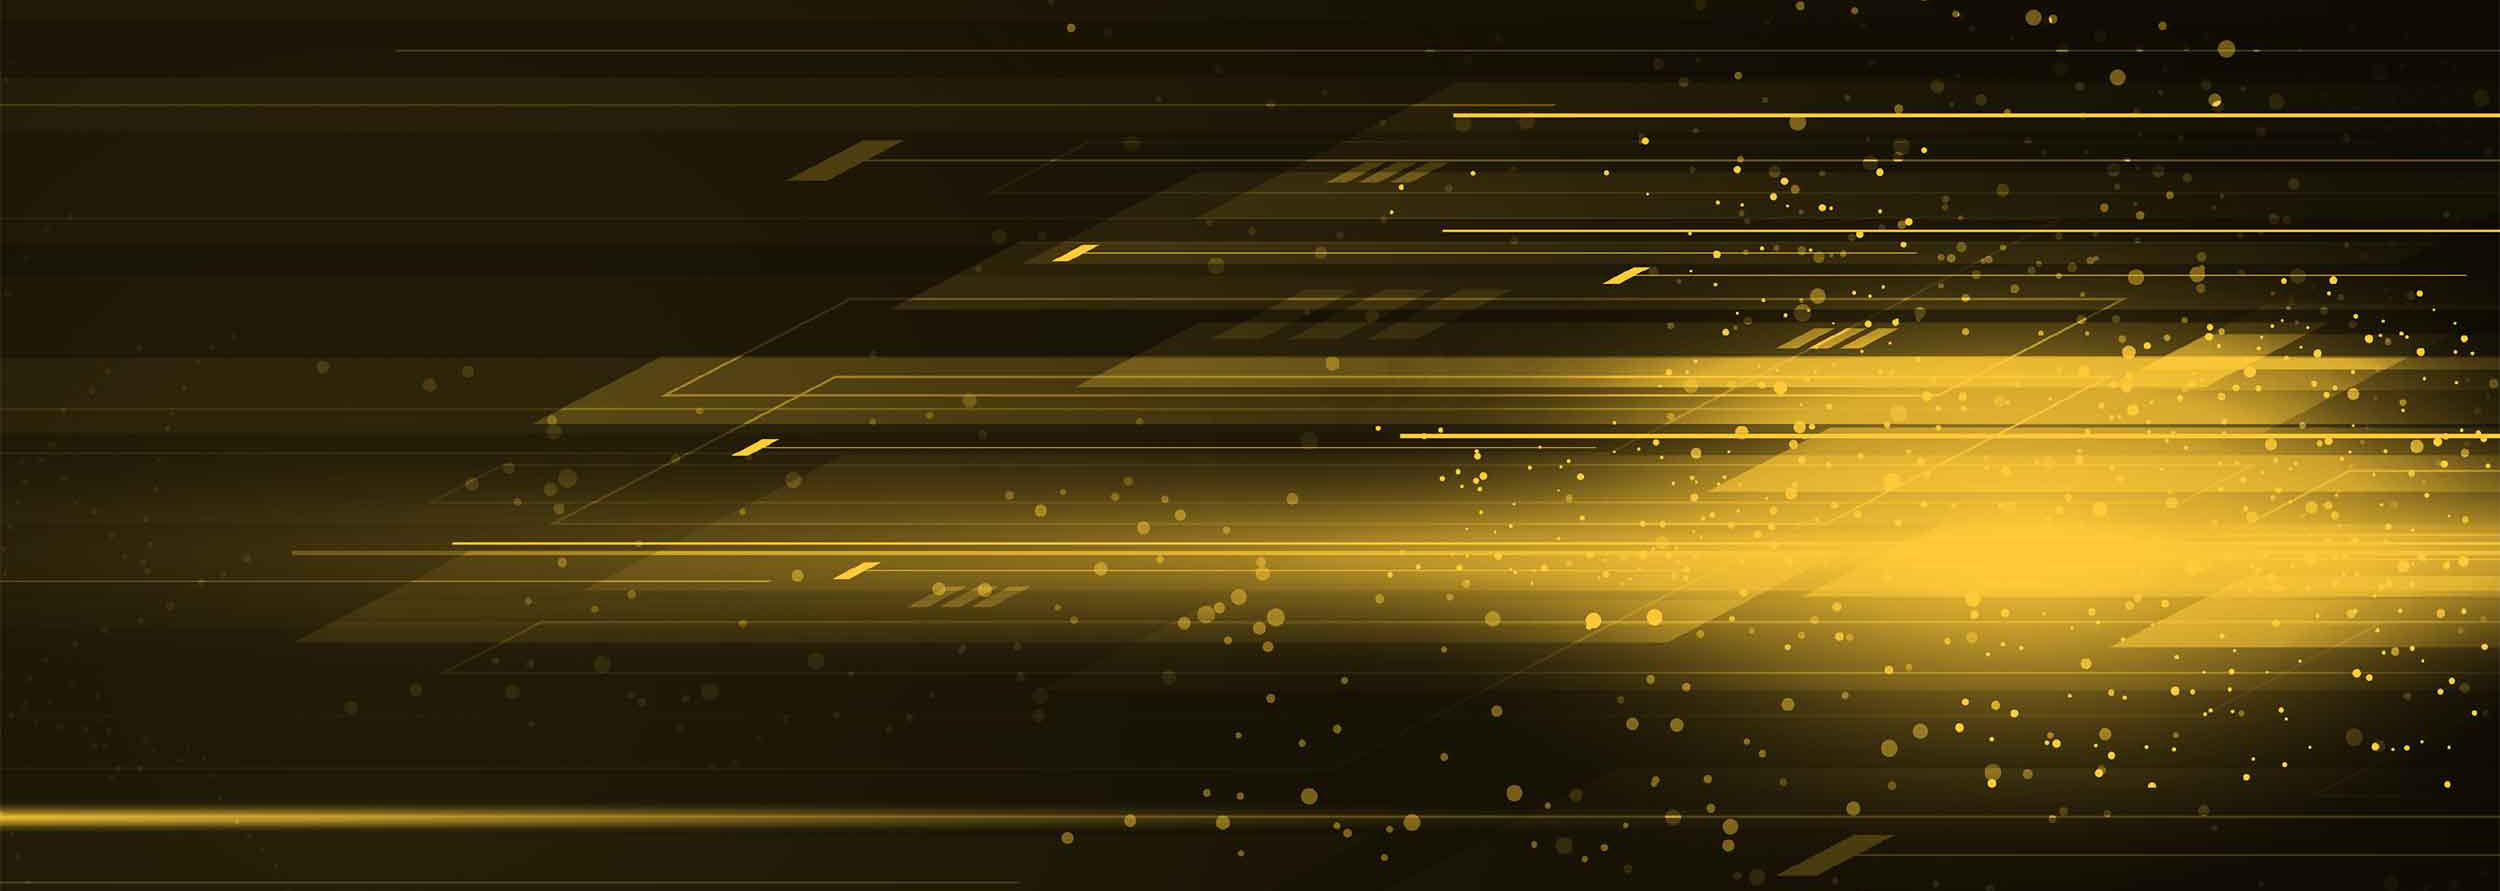 black and gold pattern graphic background